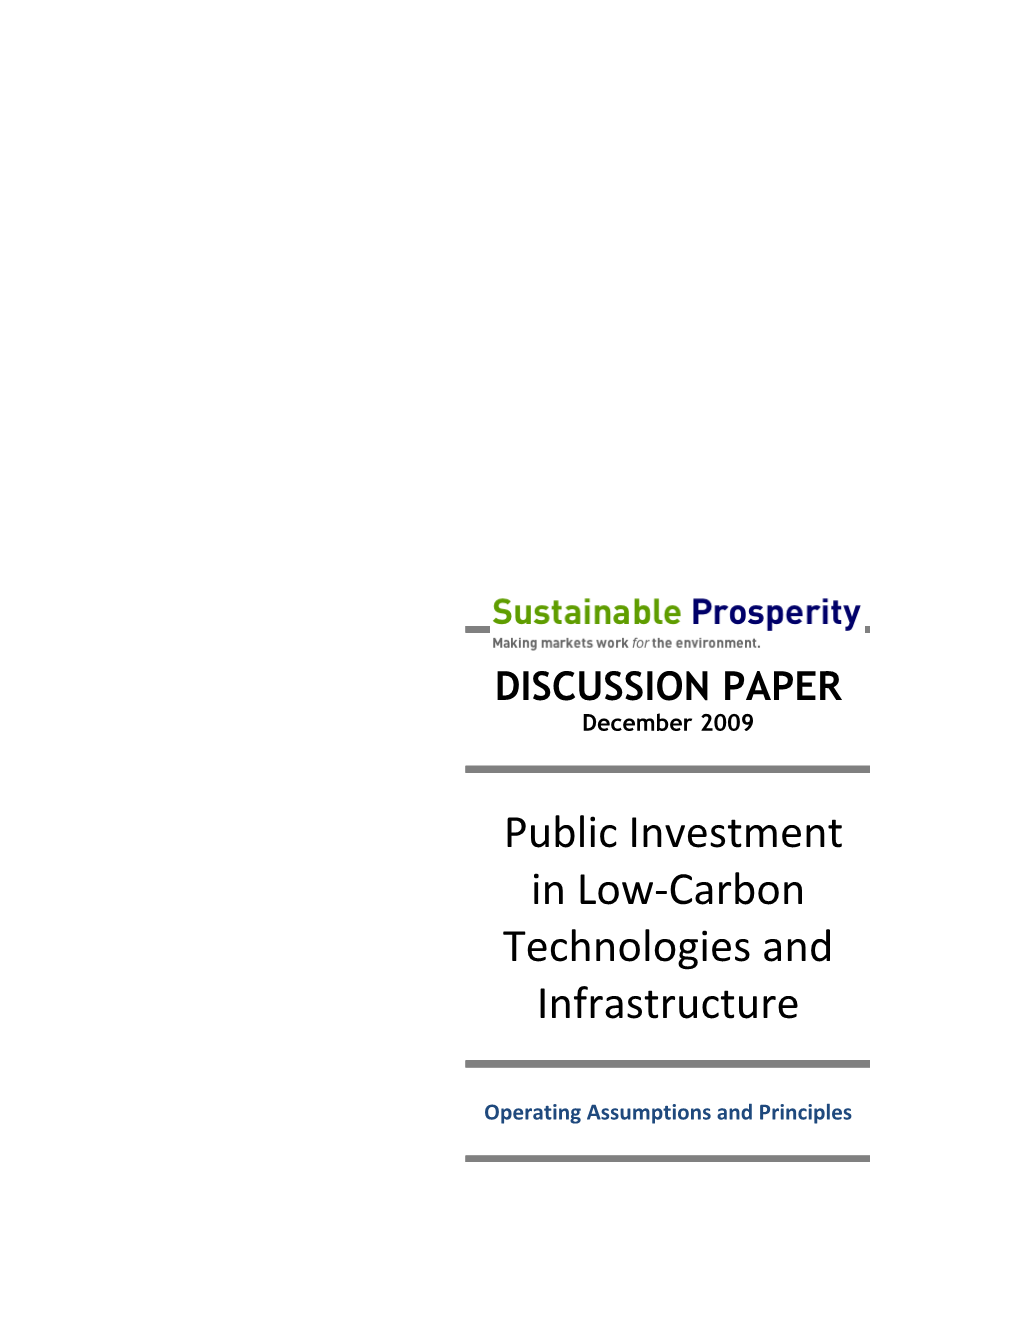 Public Investment in Low-Carbon Technologies and Infrastructure